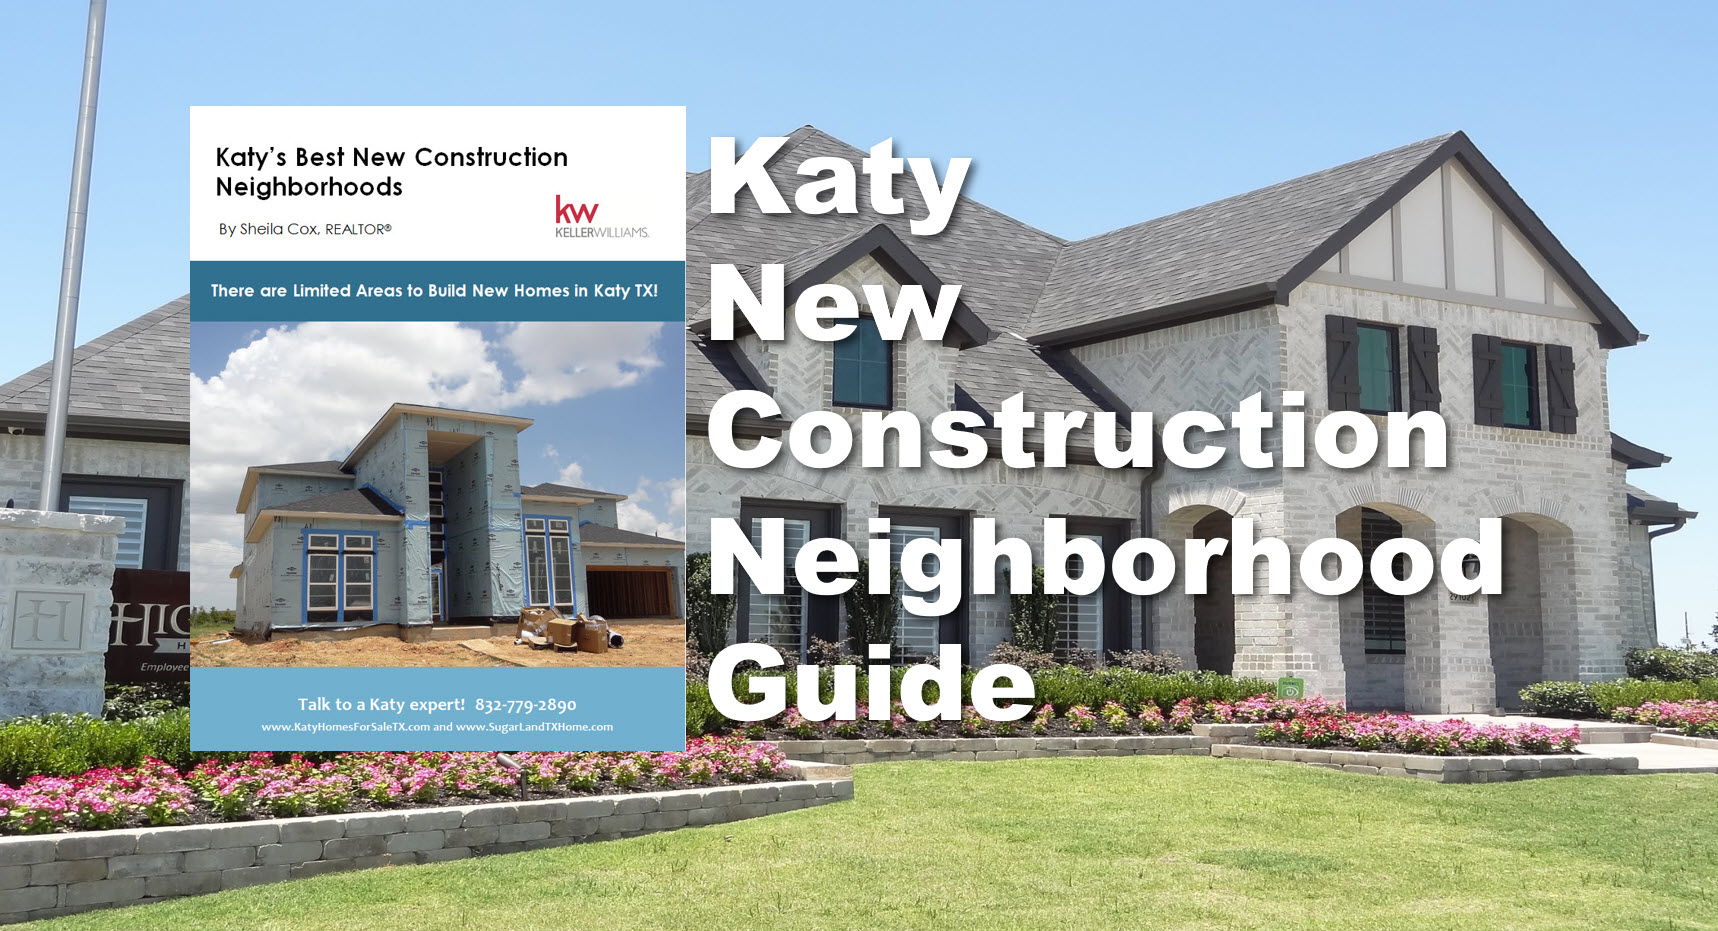 katy new construction guide